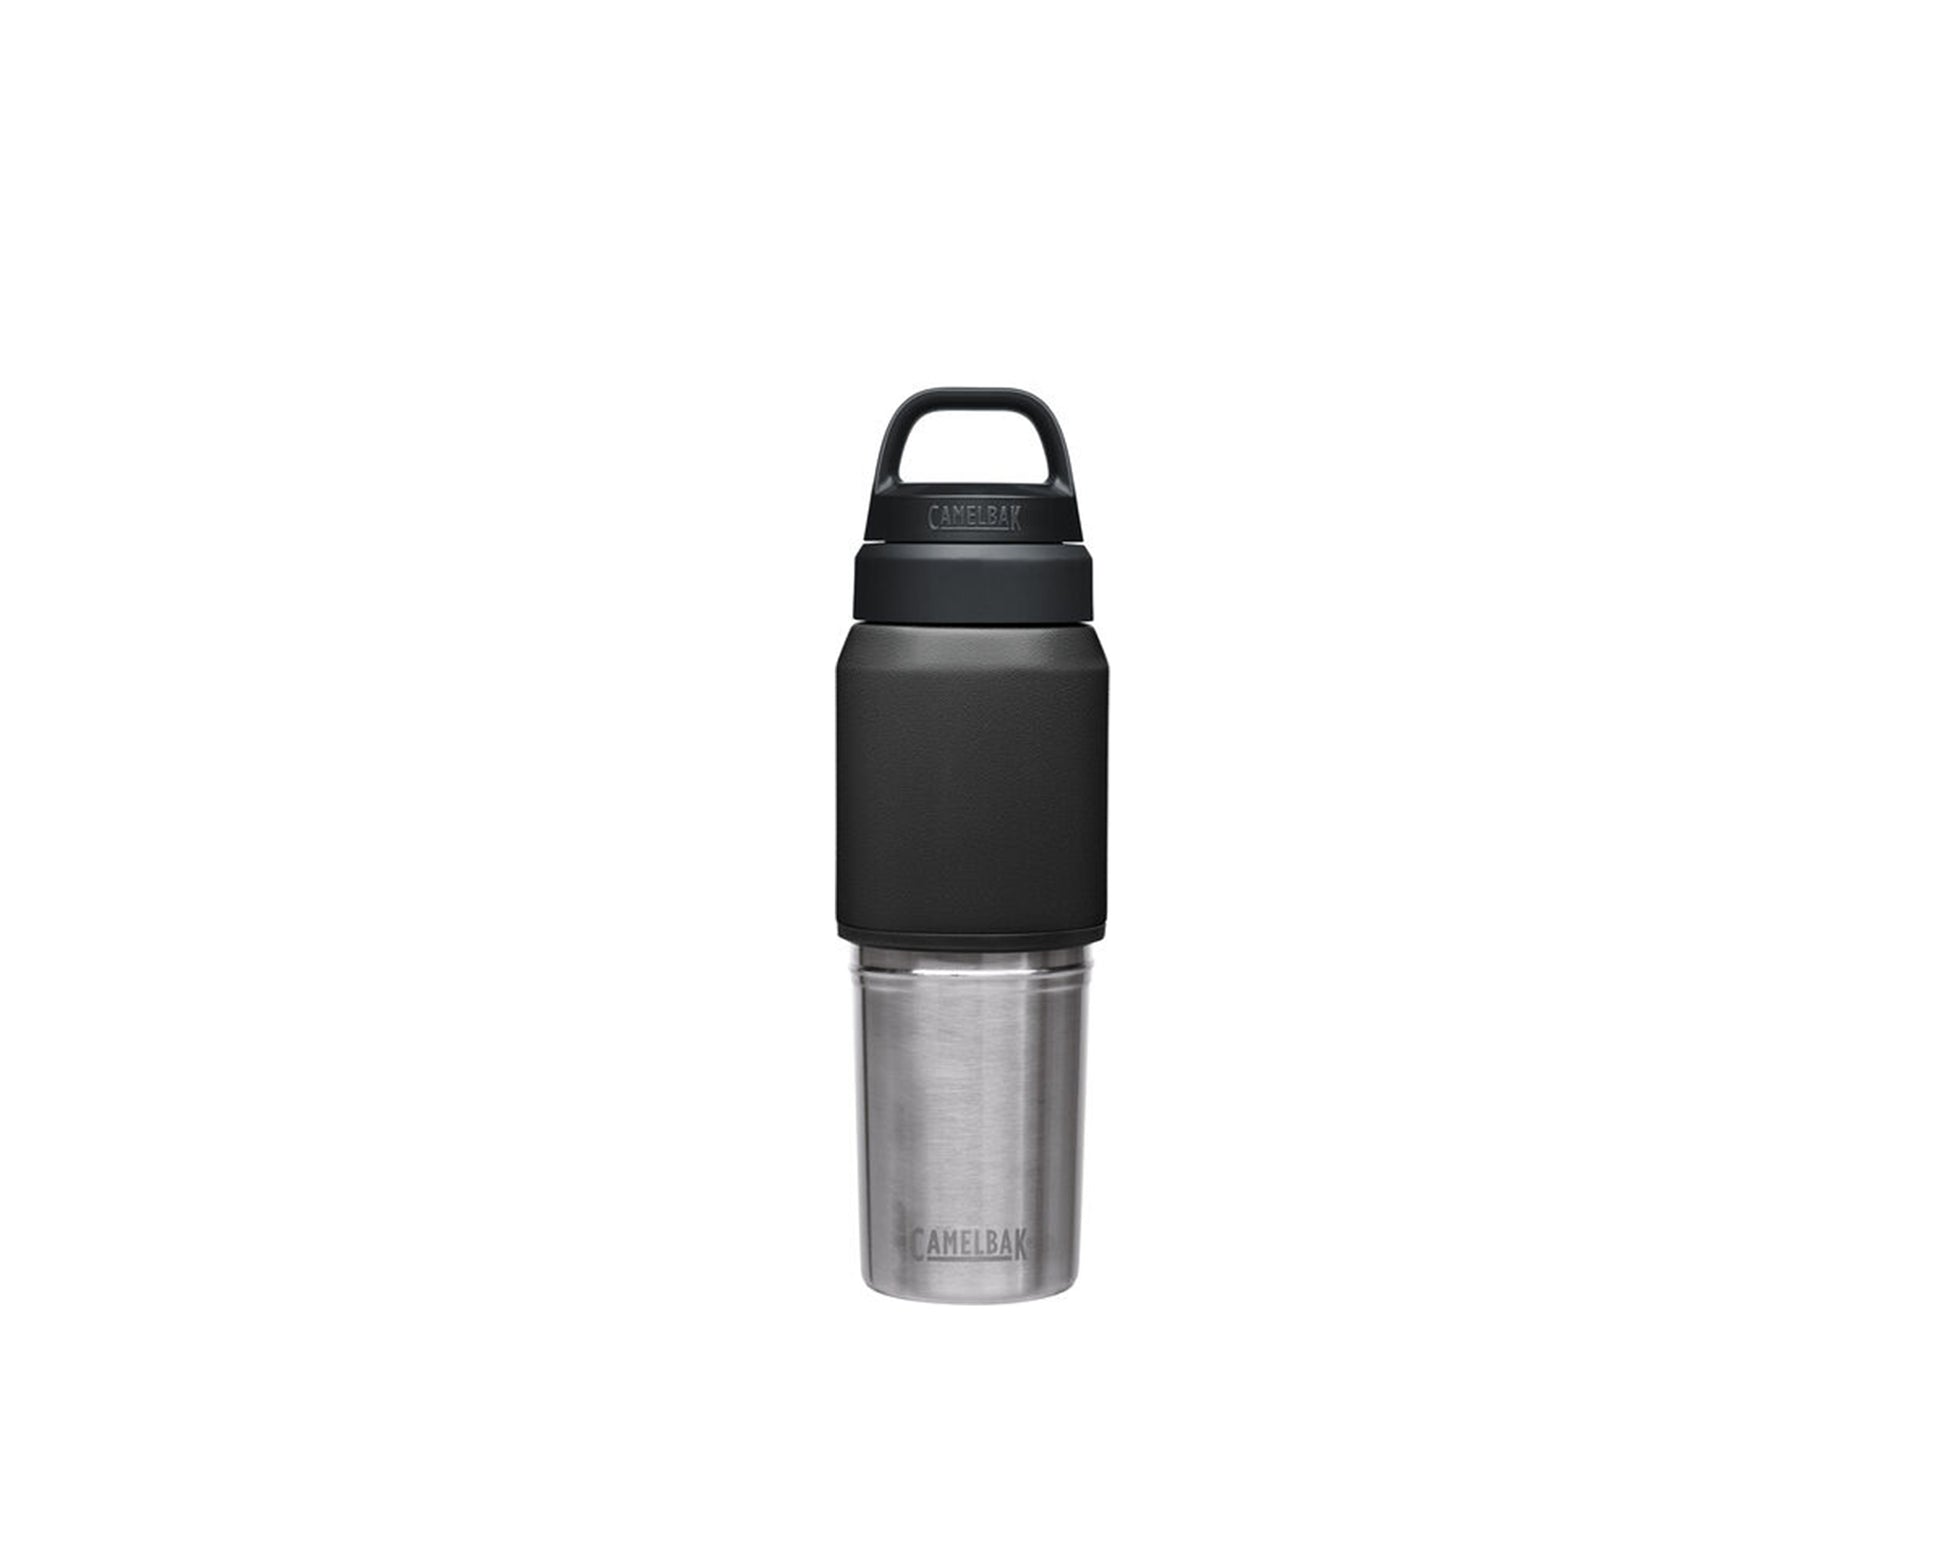 CamelBak Hot Cap Travel Mug, Insulated Stainless Steel, Perfect for Taking  Coffee or Tea on The go - Leak-Proof When Closed